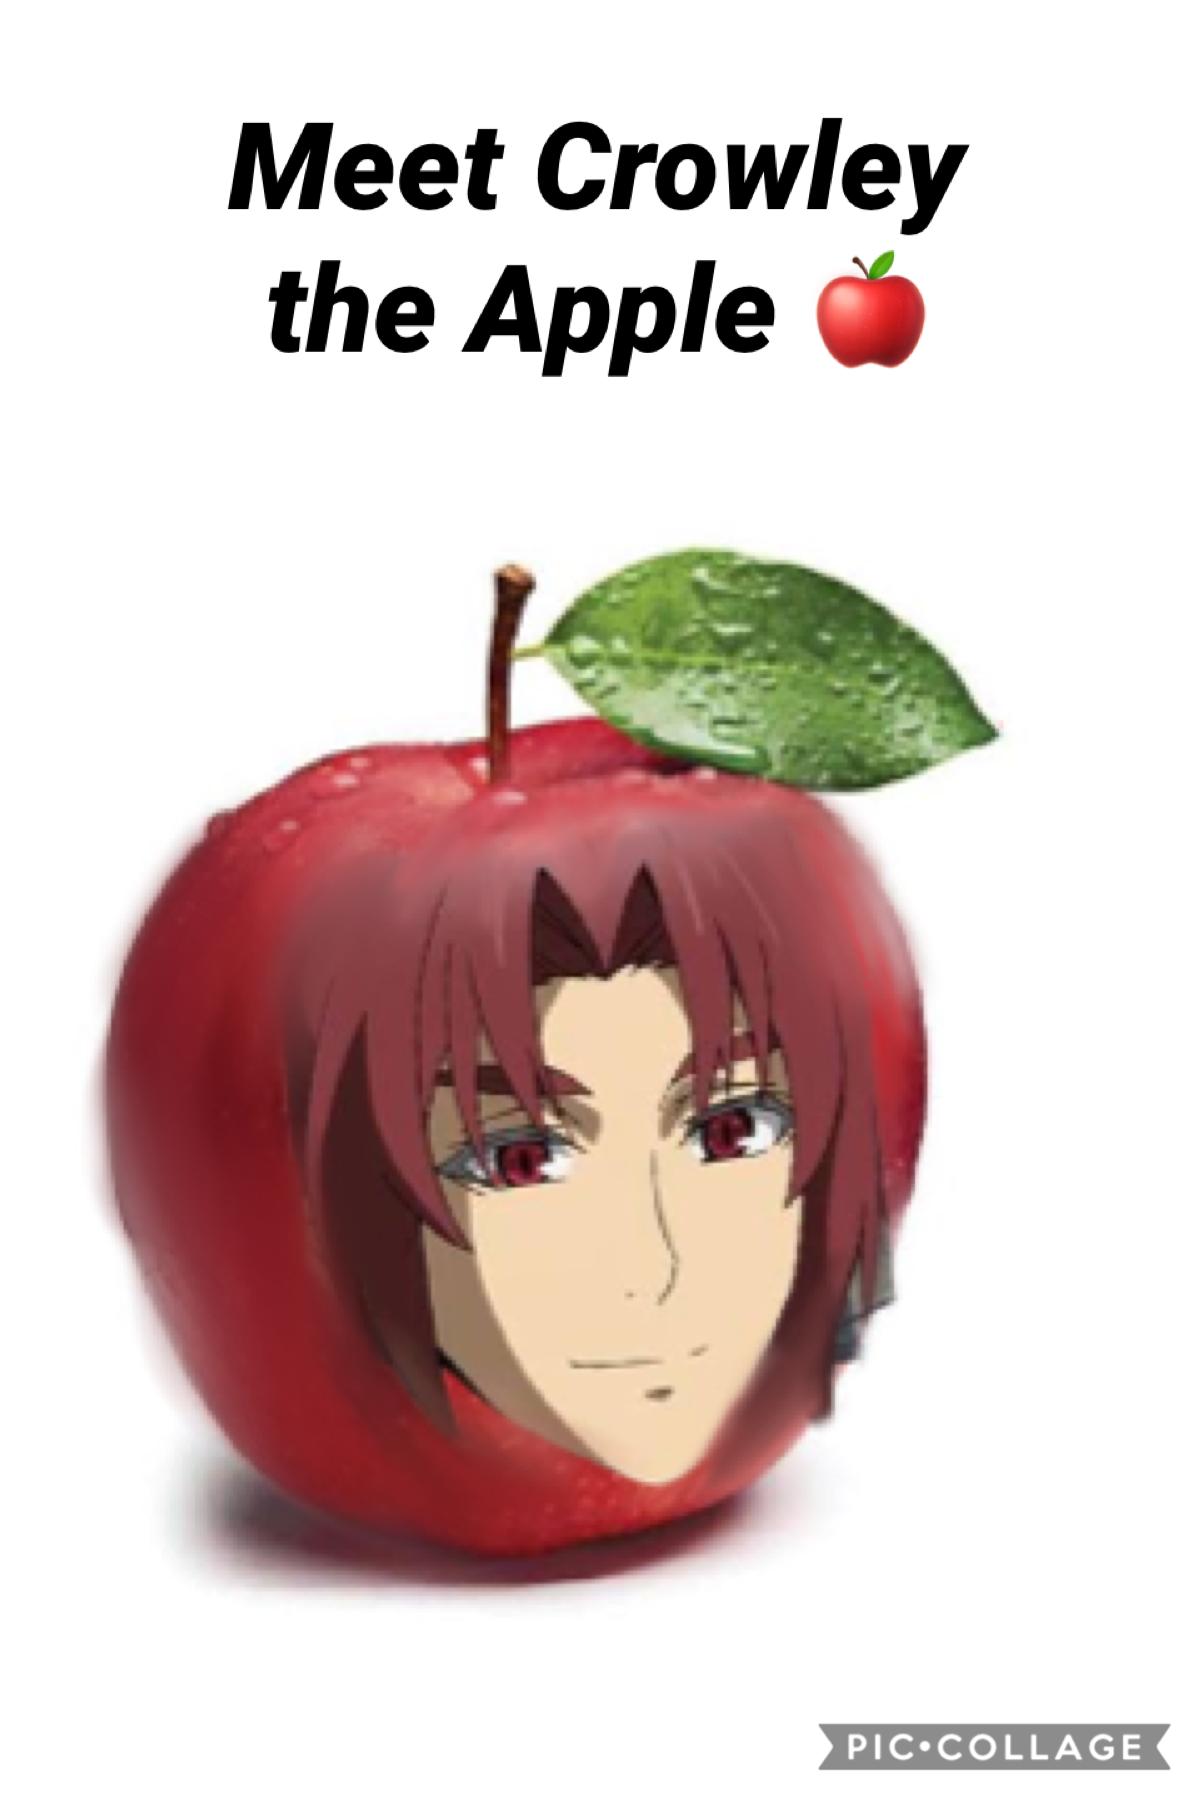 Ask Crowley the Apple 